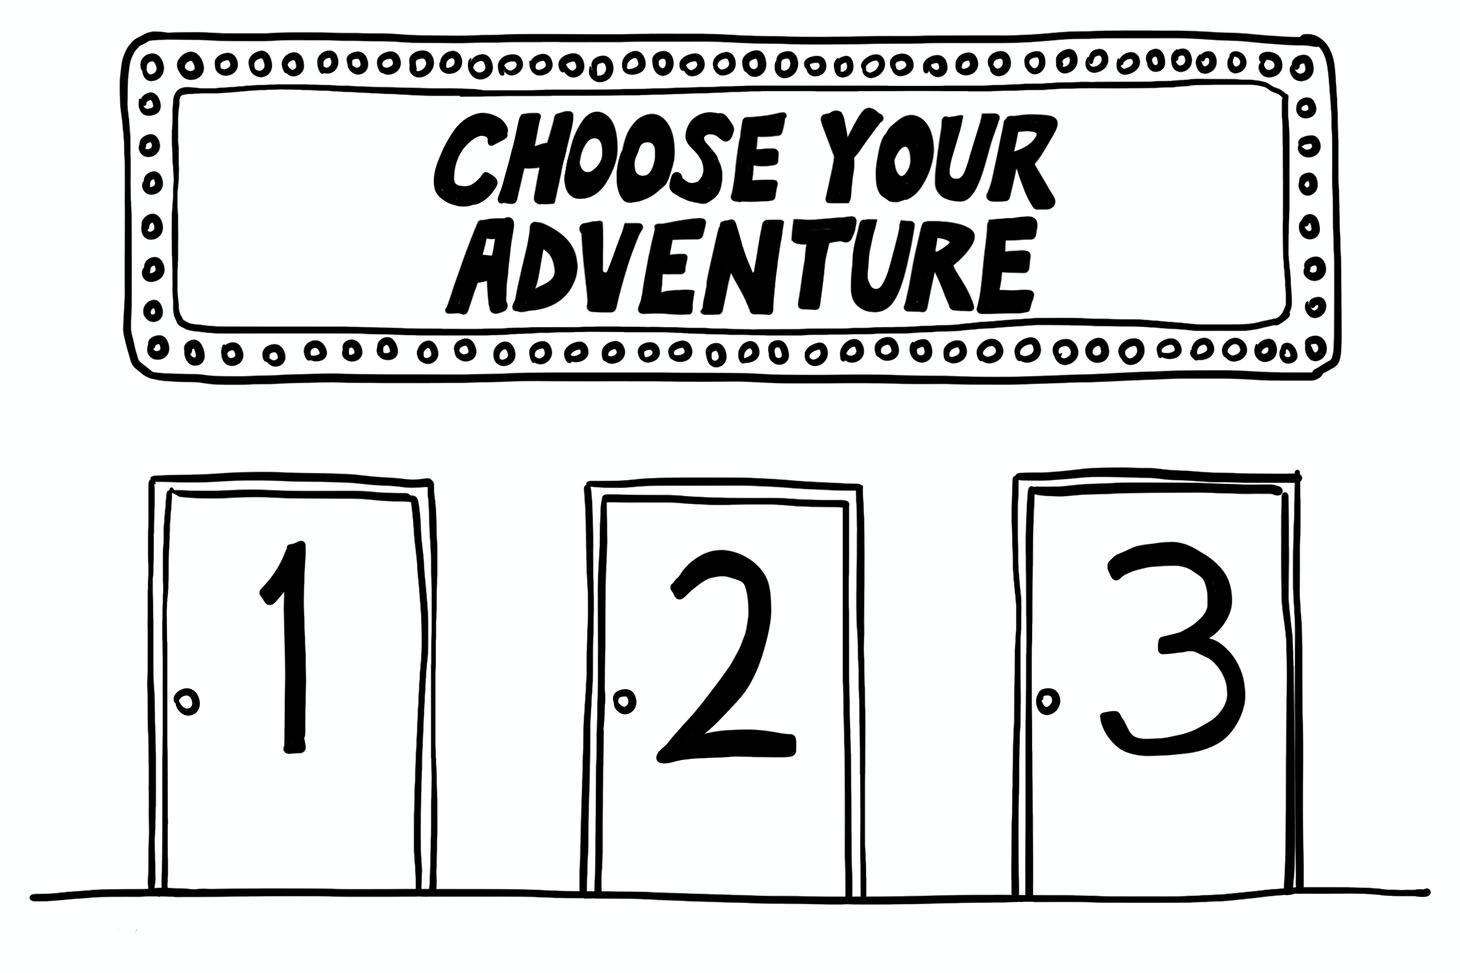 Image of three doors - numbered for different adventures